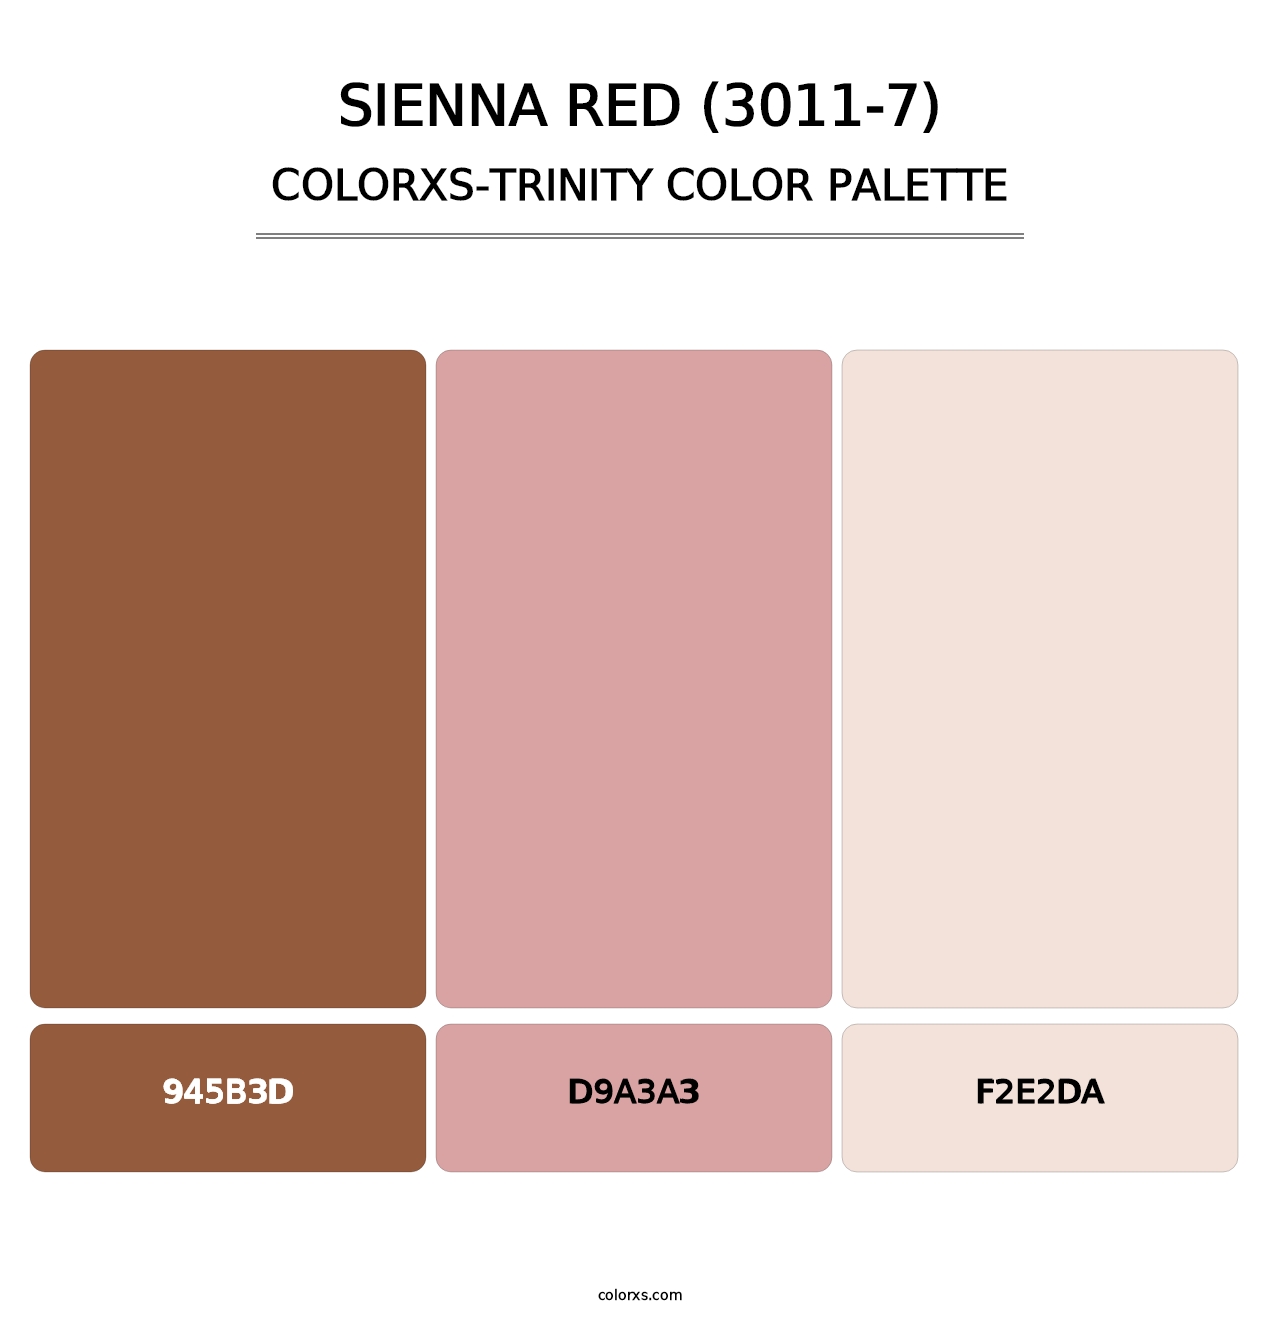 Sienna Red (3011-7) - Colorxs Trinity Palette